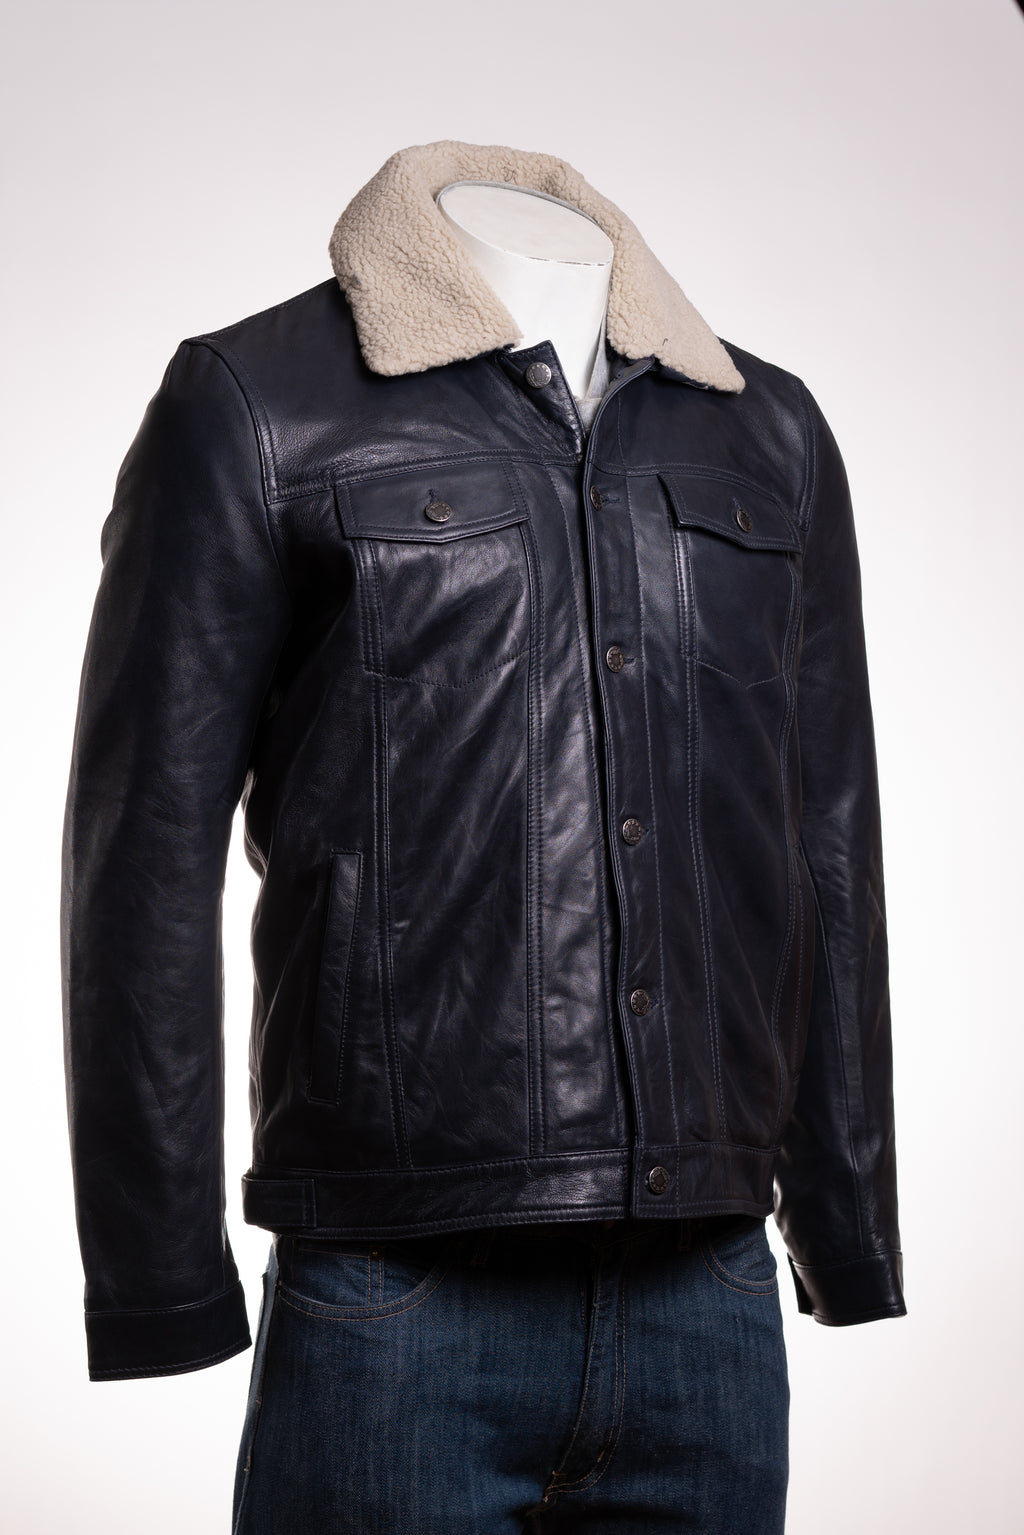 Men's Navy Shirt Style Leather Jacket With Removable Sheepskin Collar: Gabriele